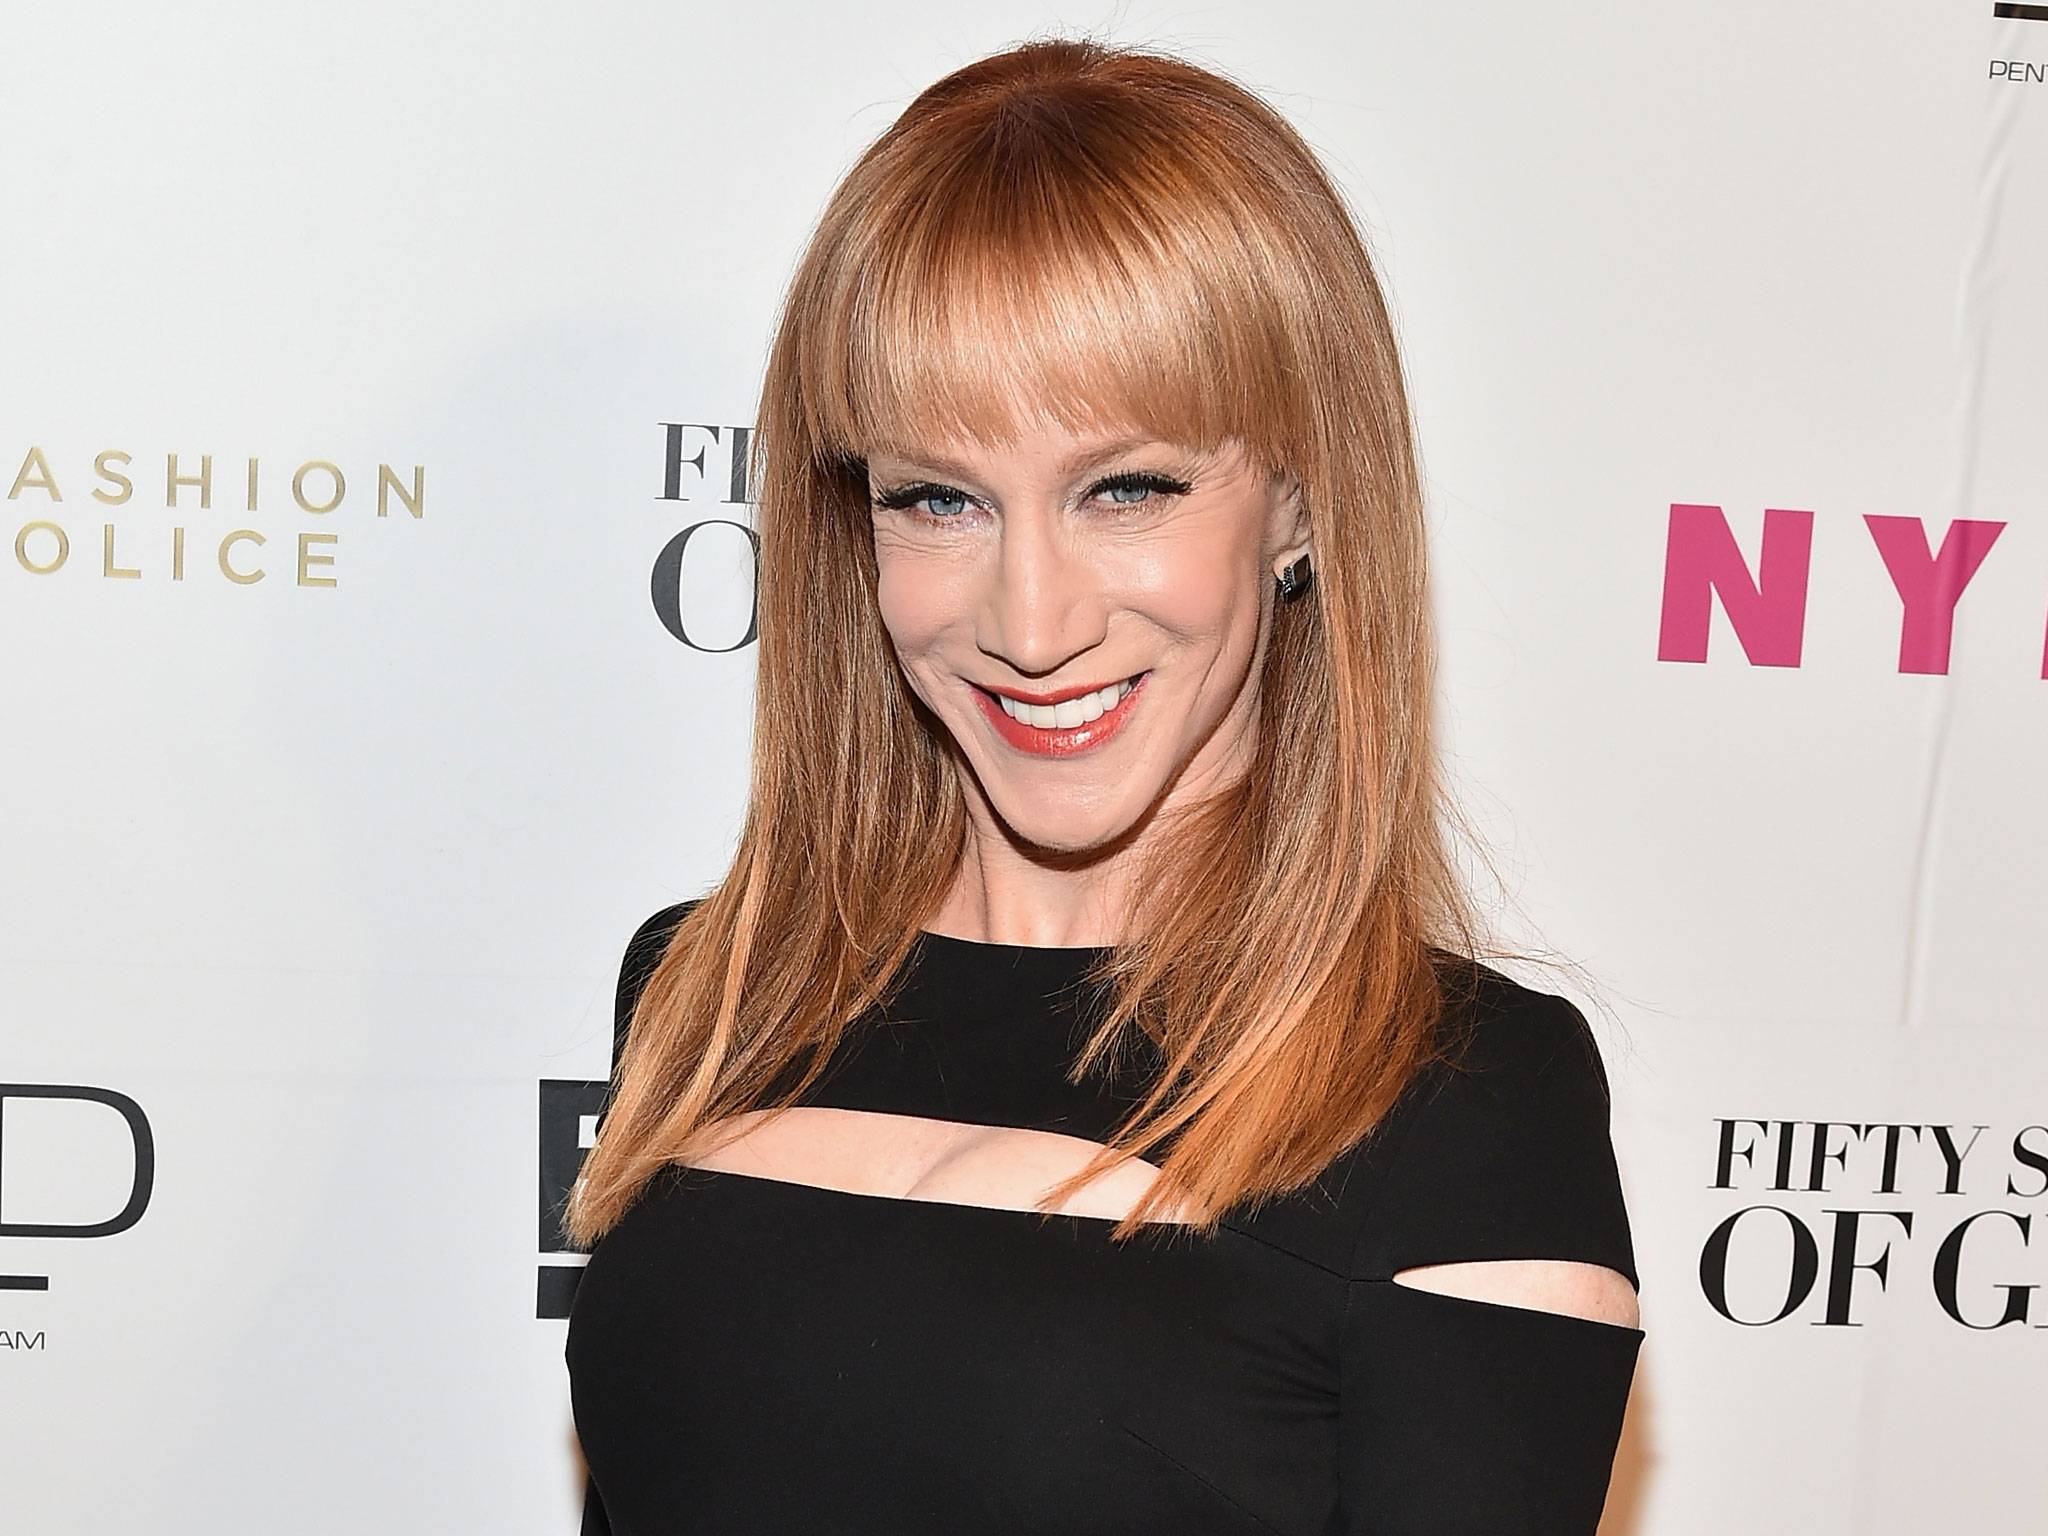 Kathy Griffin holds up Donald Trump's decapitated head in new